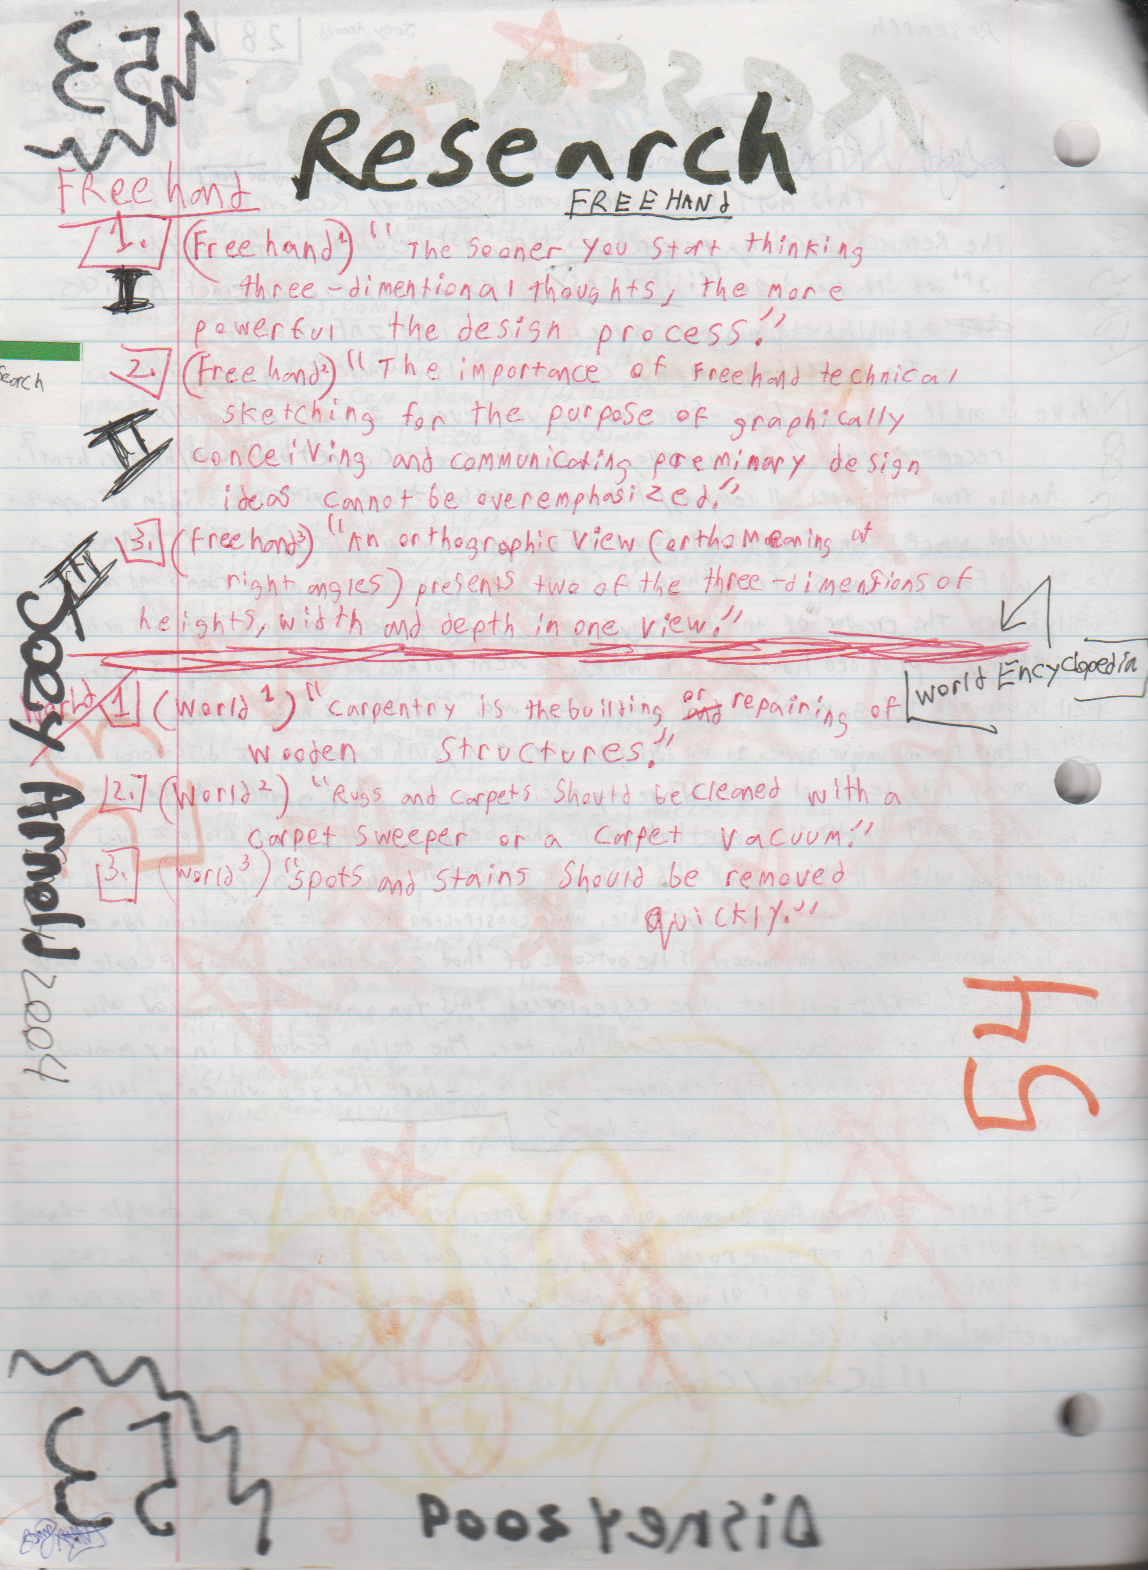 2004-01-29 - Thursday - Carpetball FGHS Senior Project Journal, Joey Arnold, Part 02, 96pages numbered, Notebook-52.png